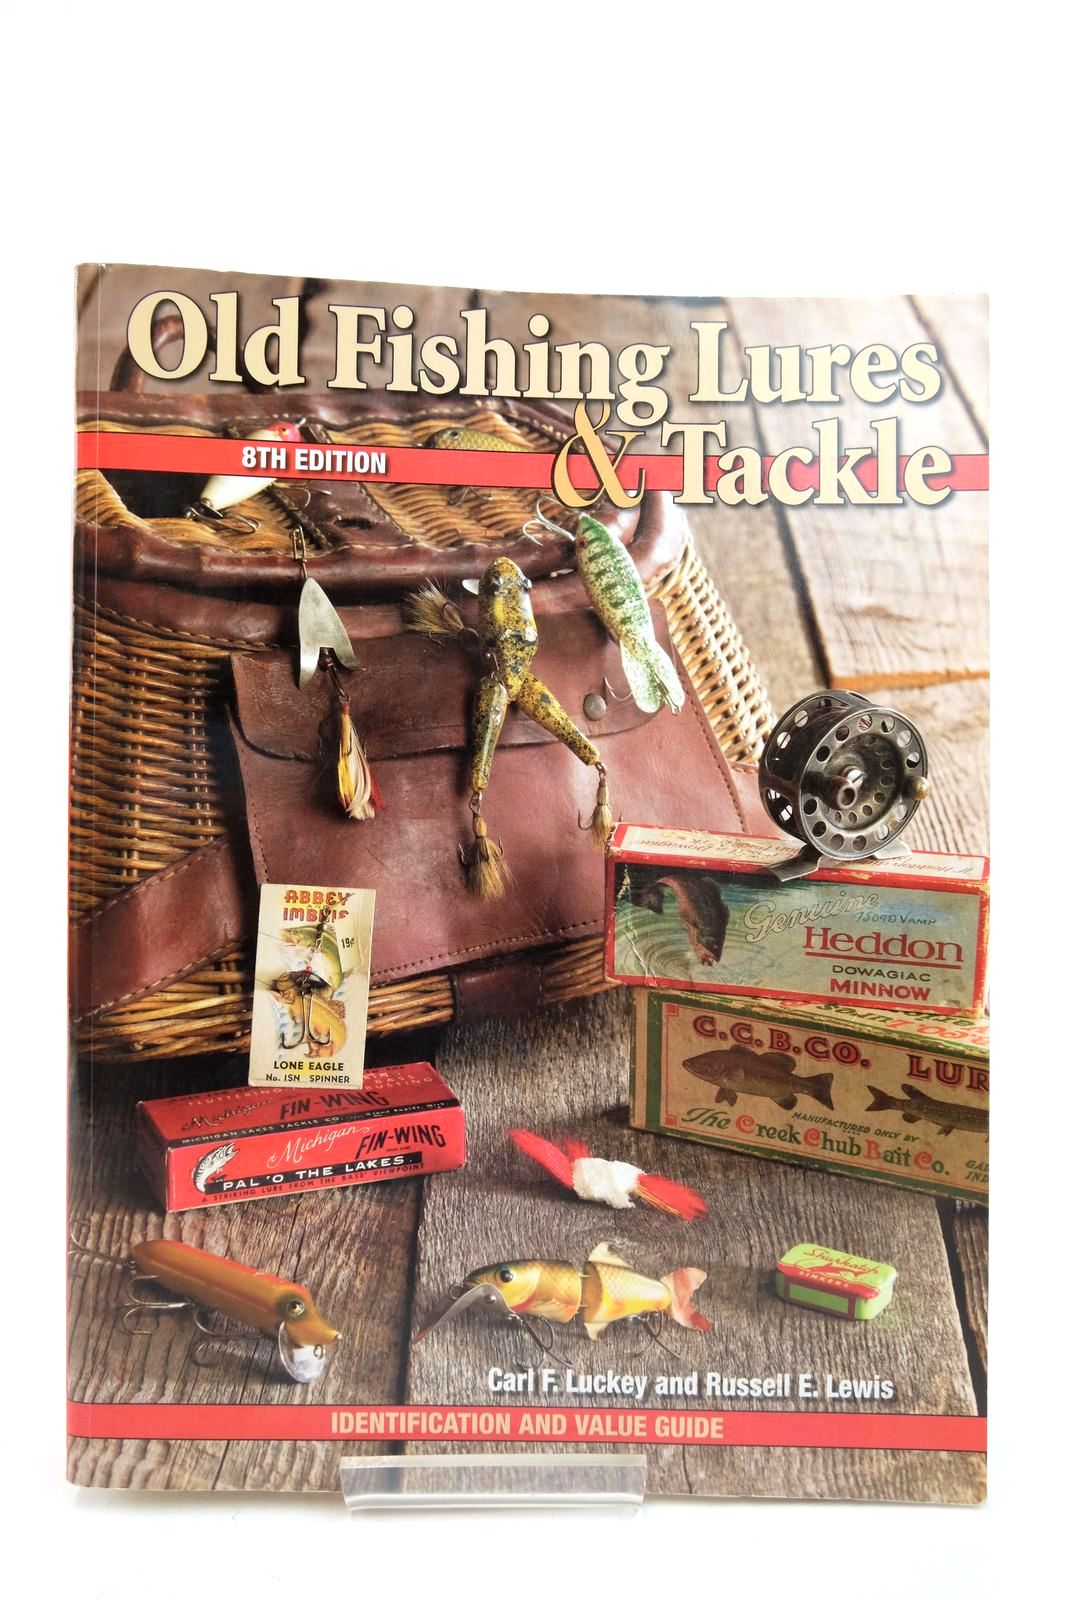 Old Fishing Lures & Tackle: Identification and Value Guide [Book]